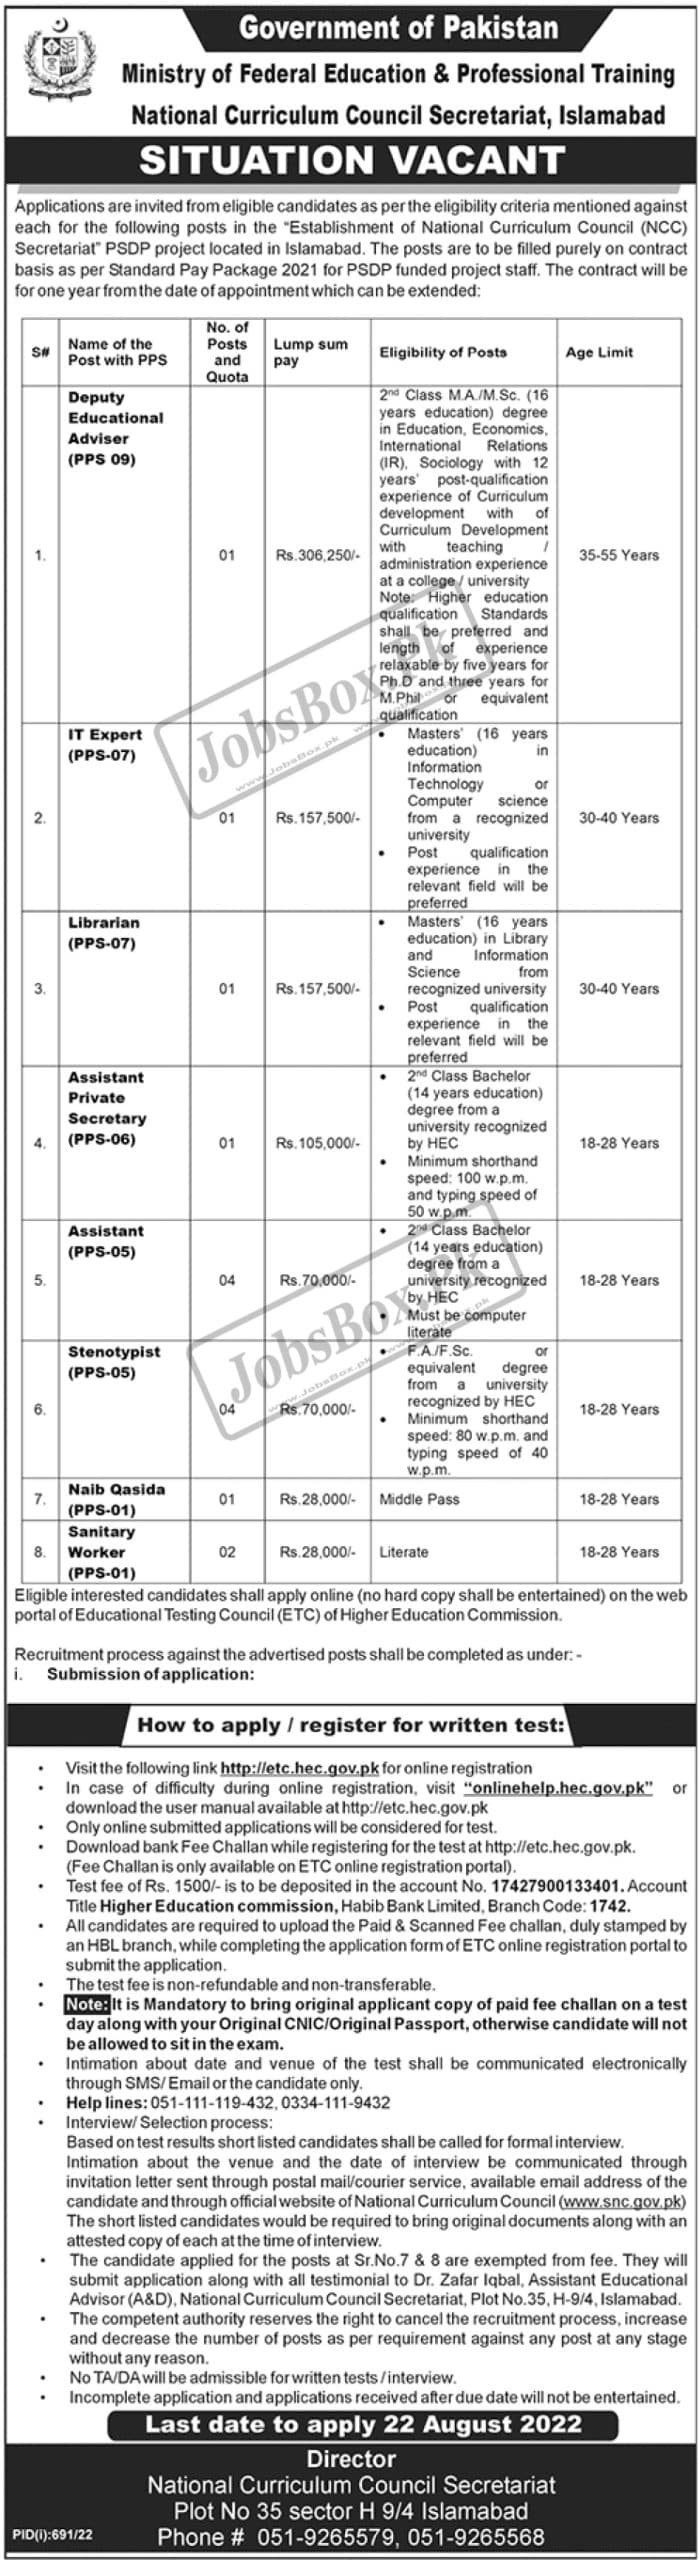 http://etc.hec.gov.pk - Ministry of Federal Education & Professional Training Jobs 2022